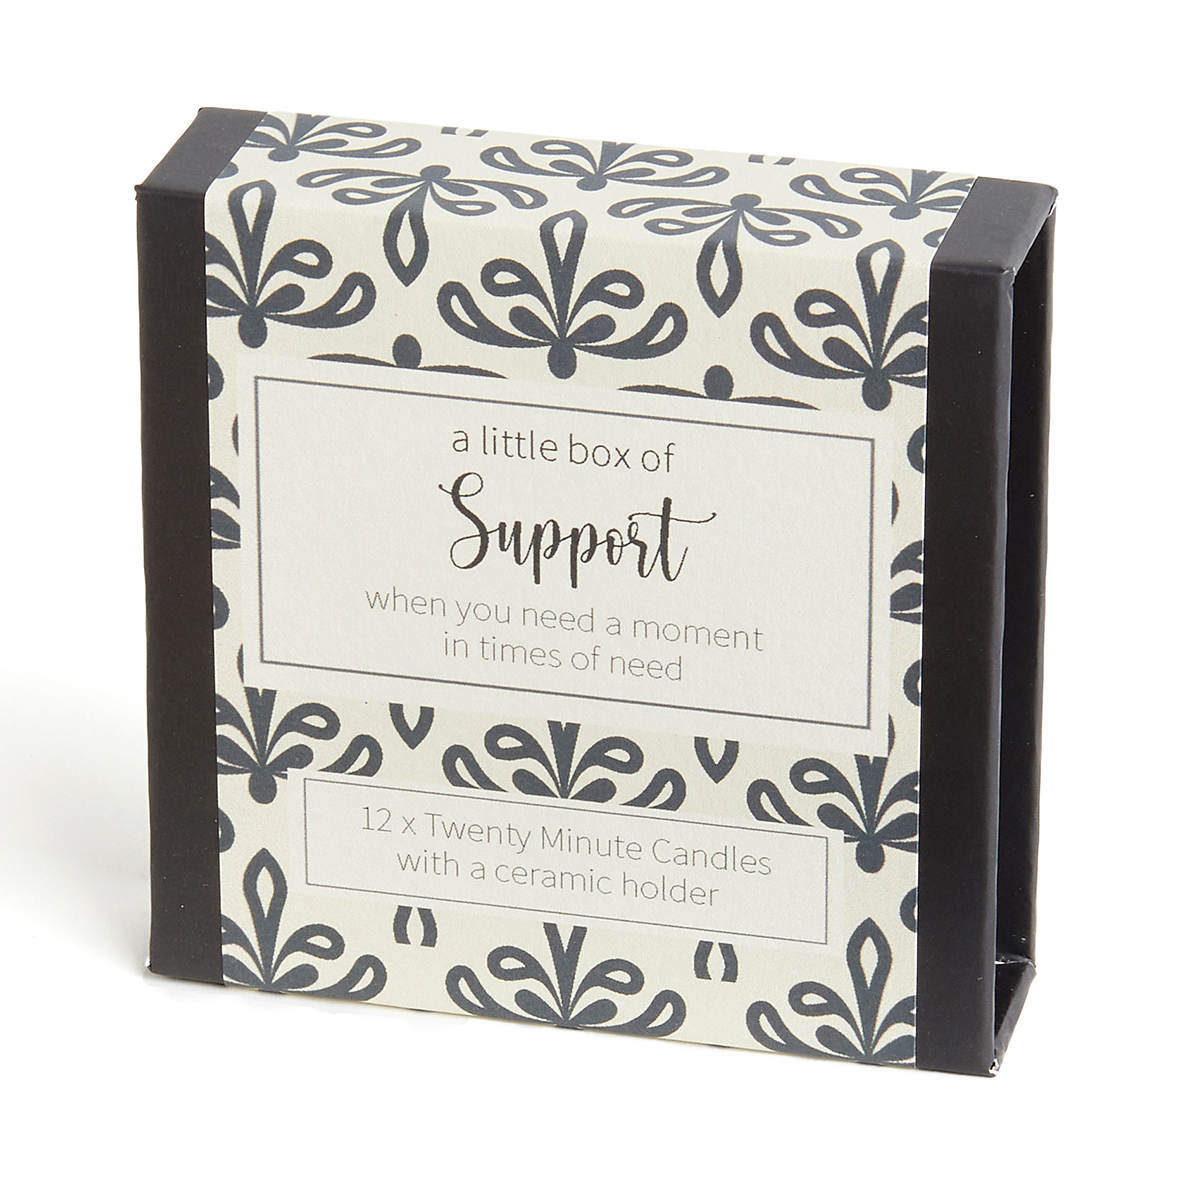 A little box of Support Candles